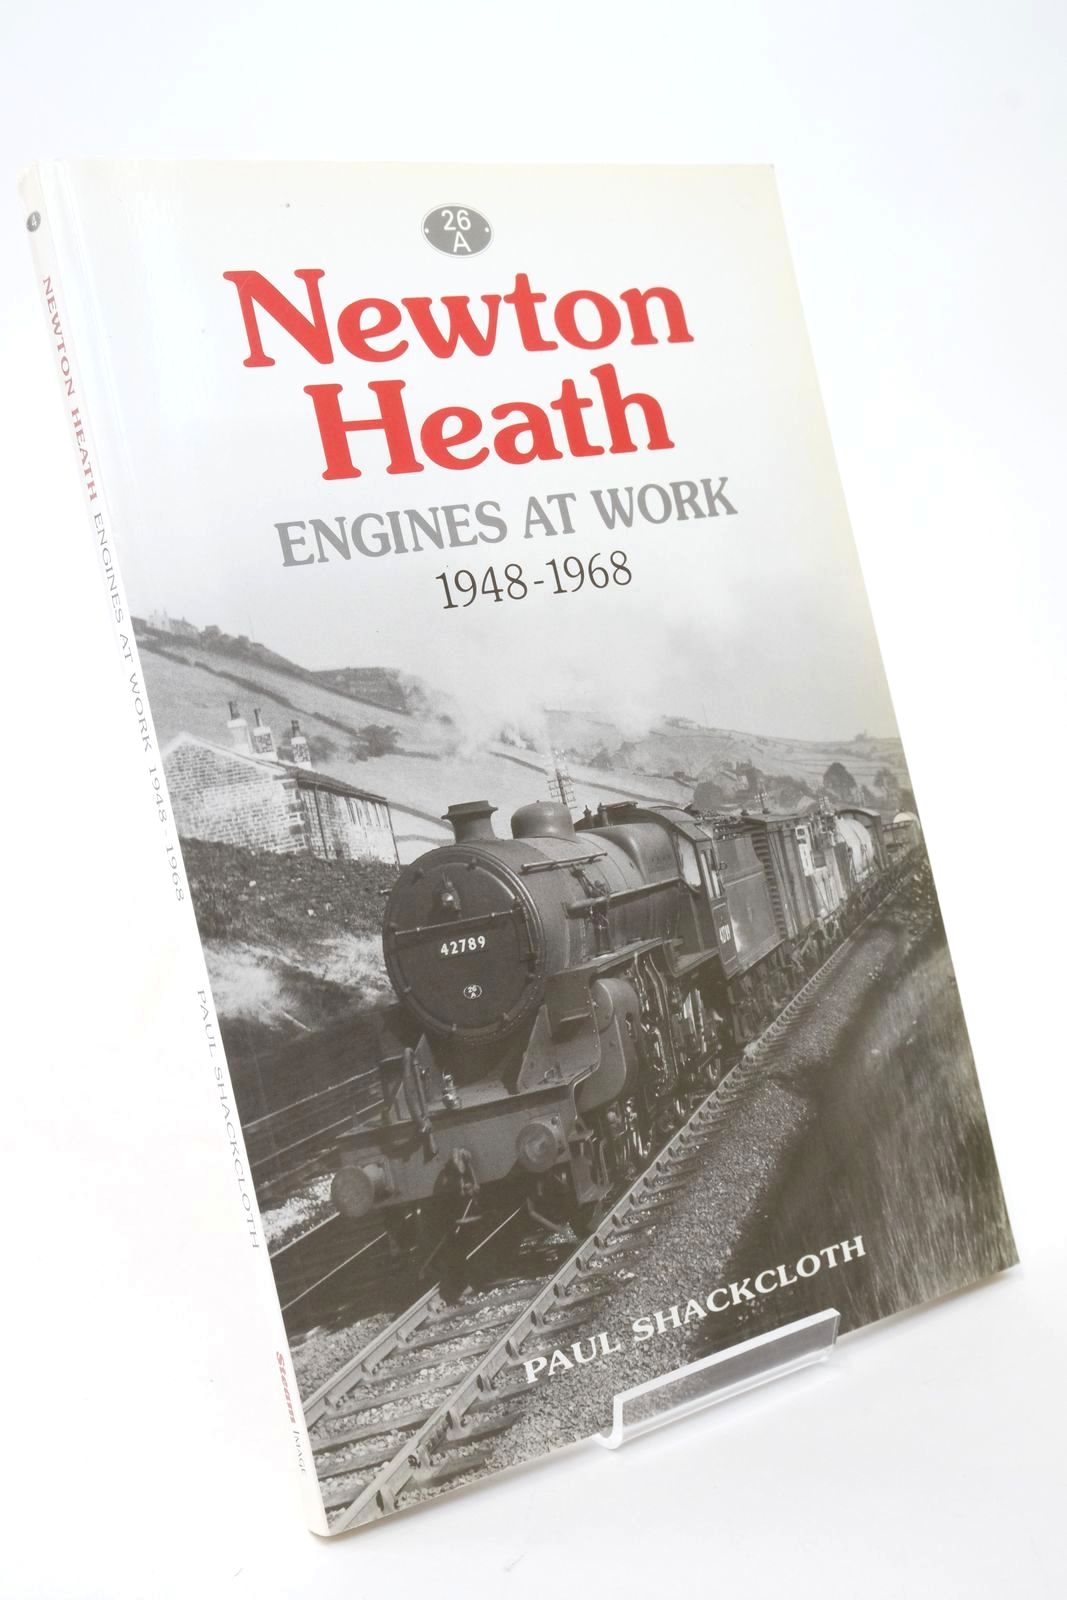 Photo of NEWTON HEATH ENGINES AT WORK 1948-1968 written by Shackcloth, Paul published by Steam Image (STOCK CODE: 1322525)  for sale by Stella & Rose's Books